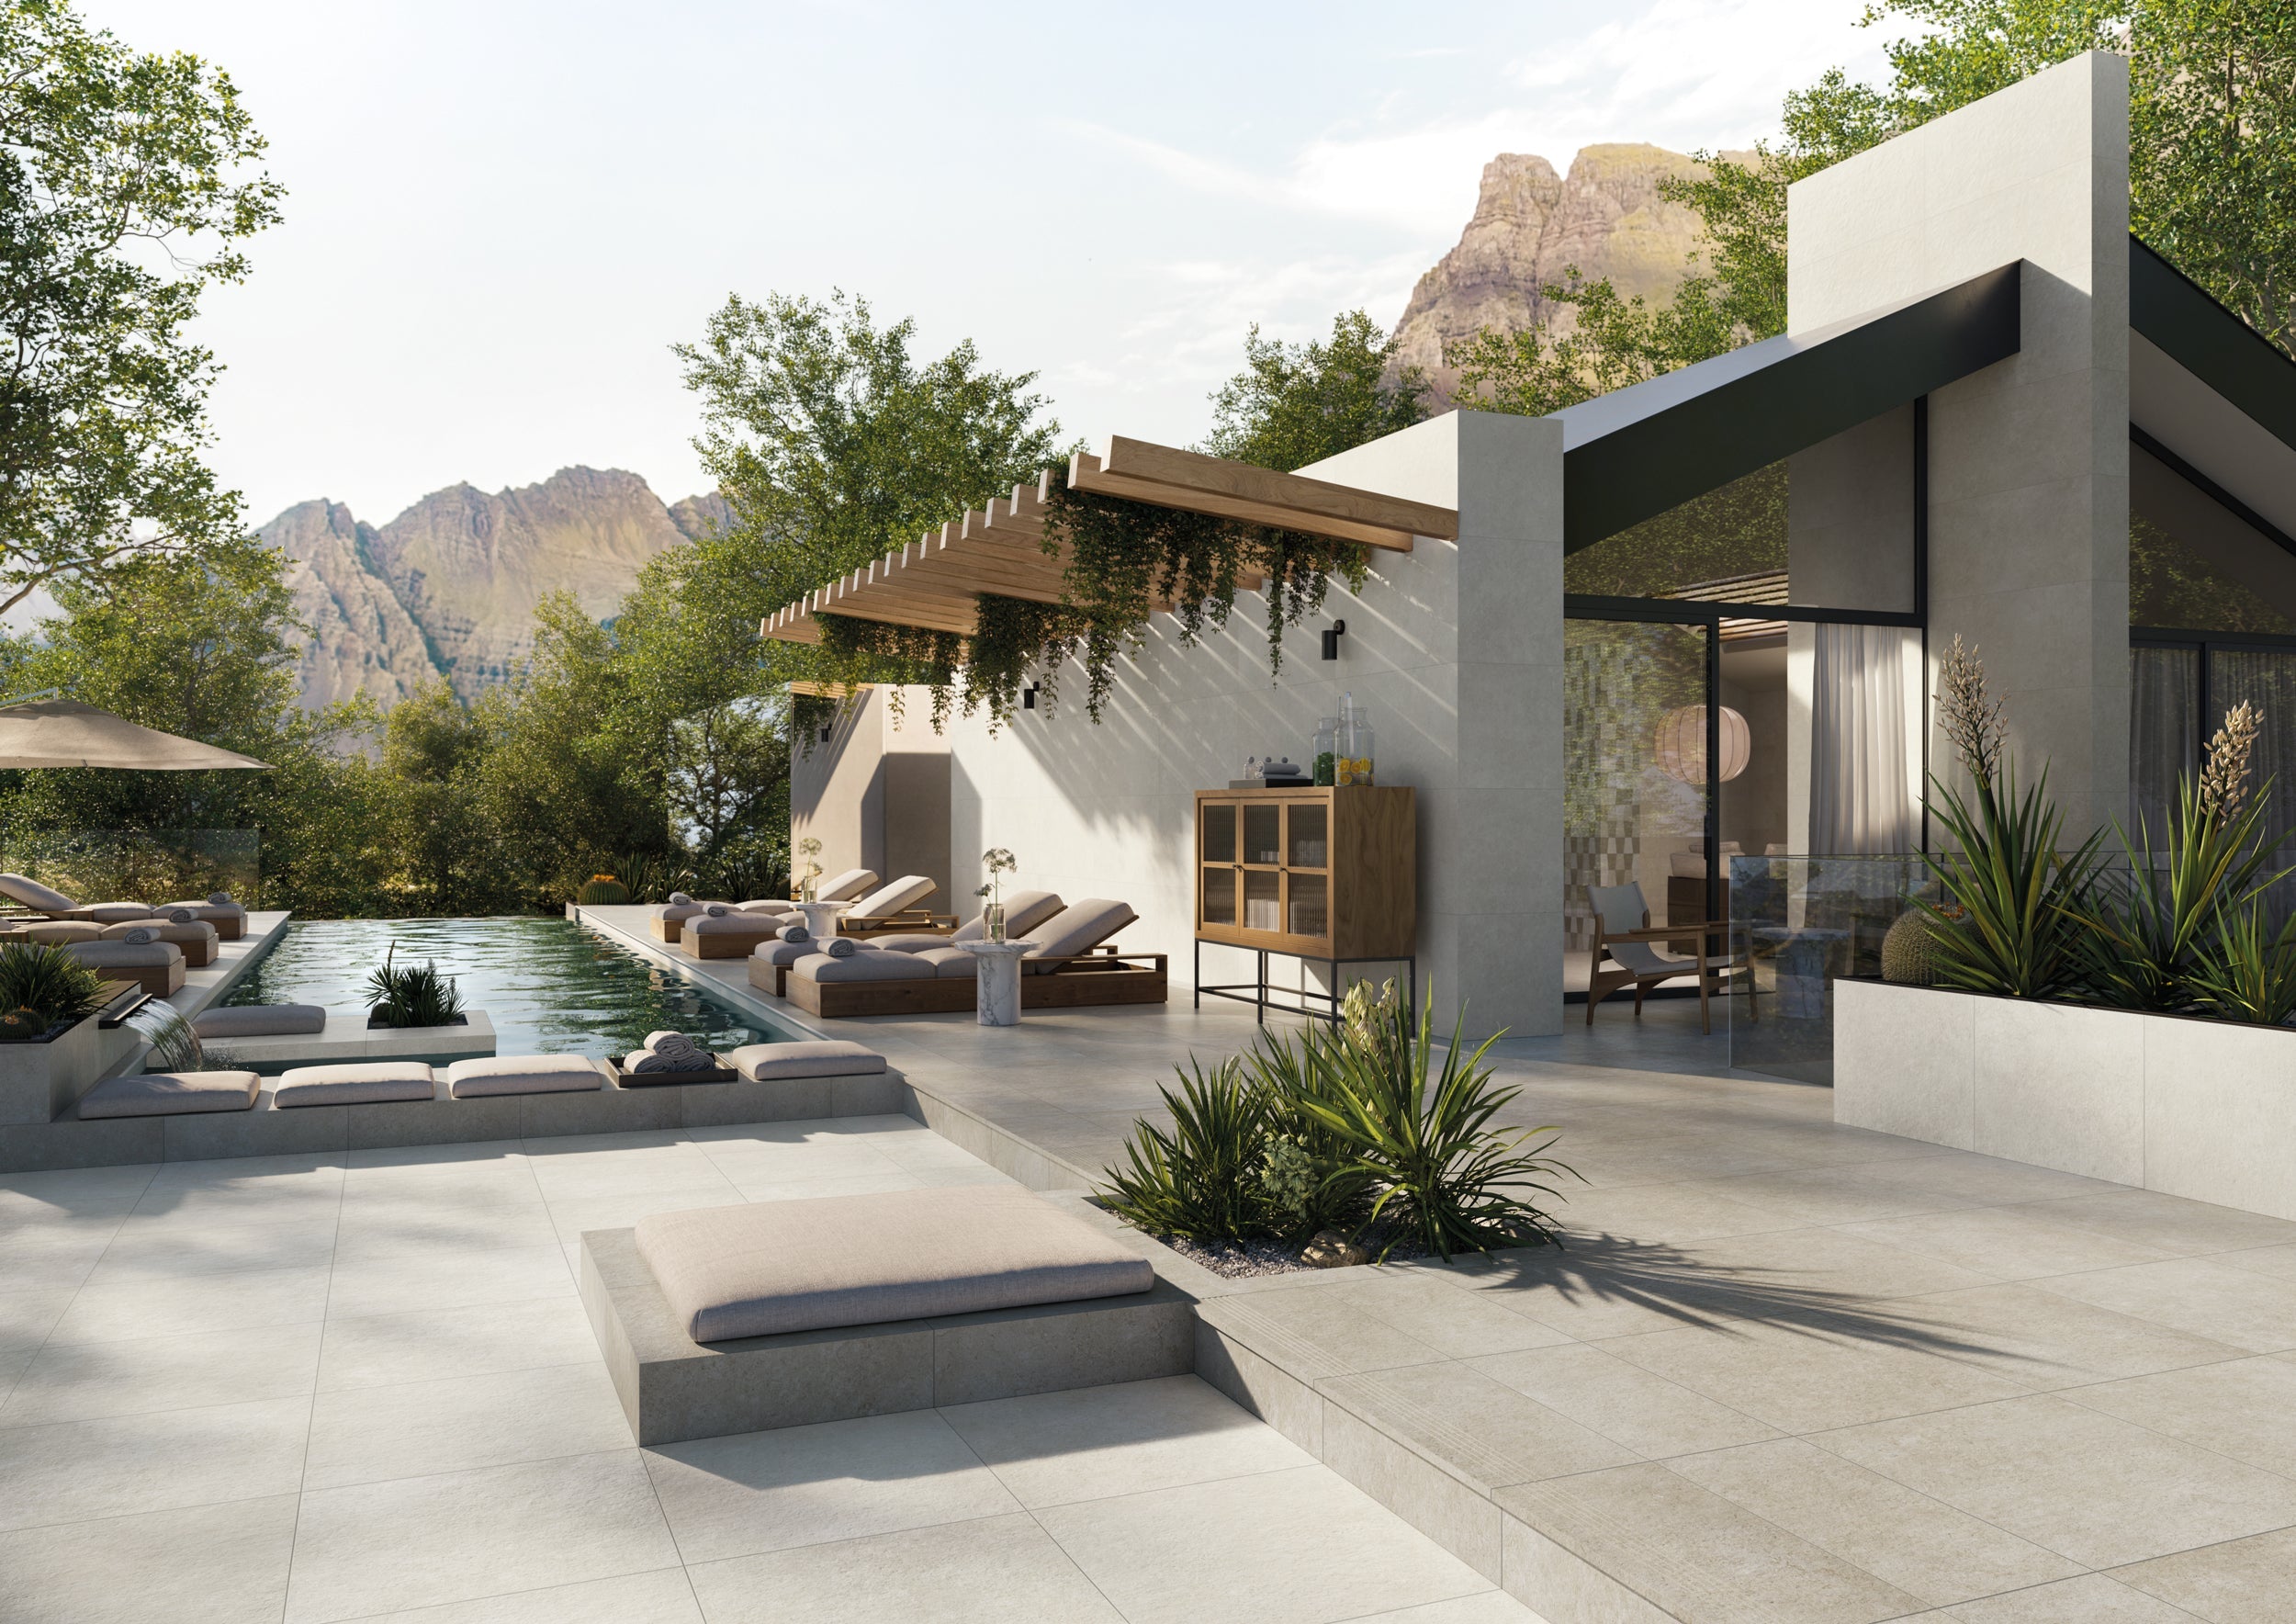 Luxury outdoor porcelain tile collection by Surface Group featuring modern patio design with pool, lounge chairs, and mountain view.